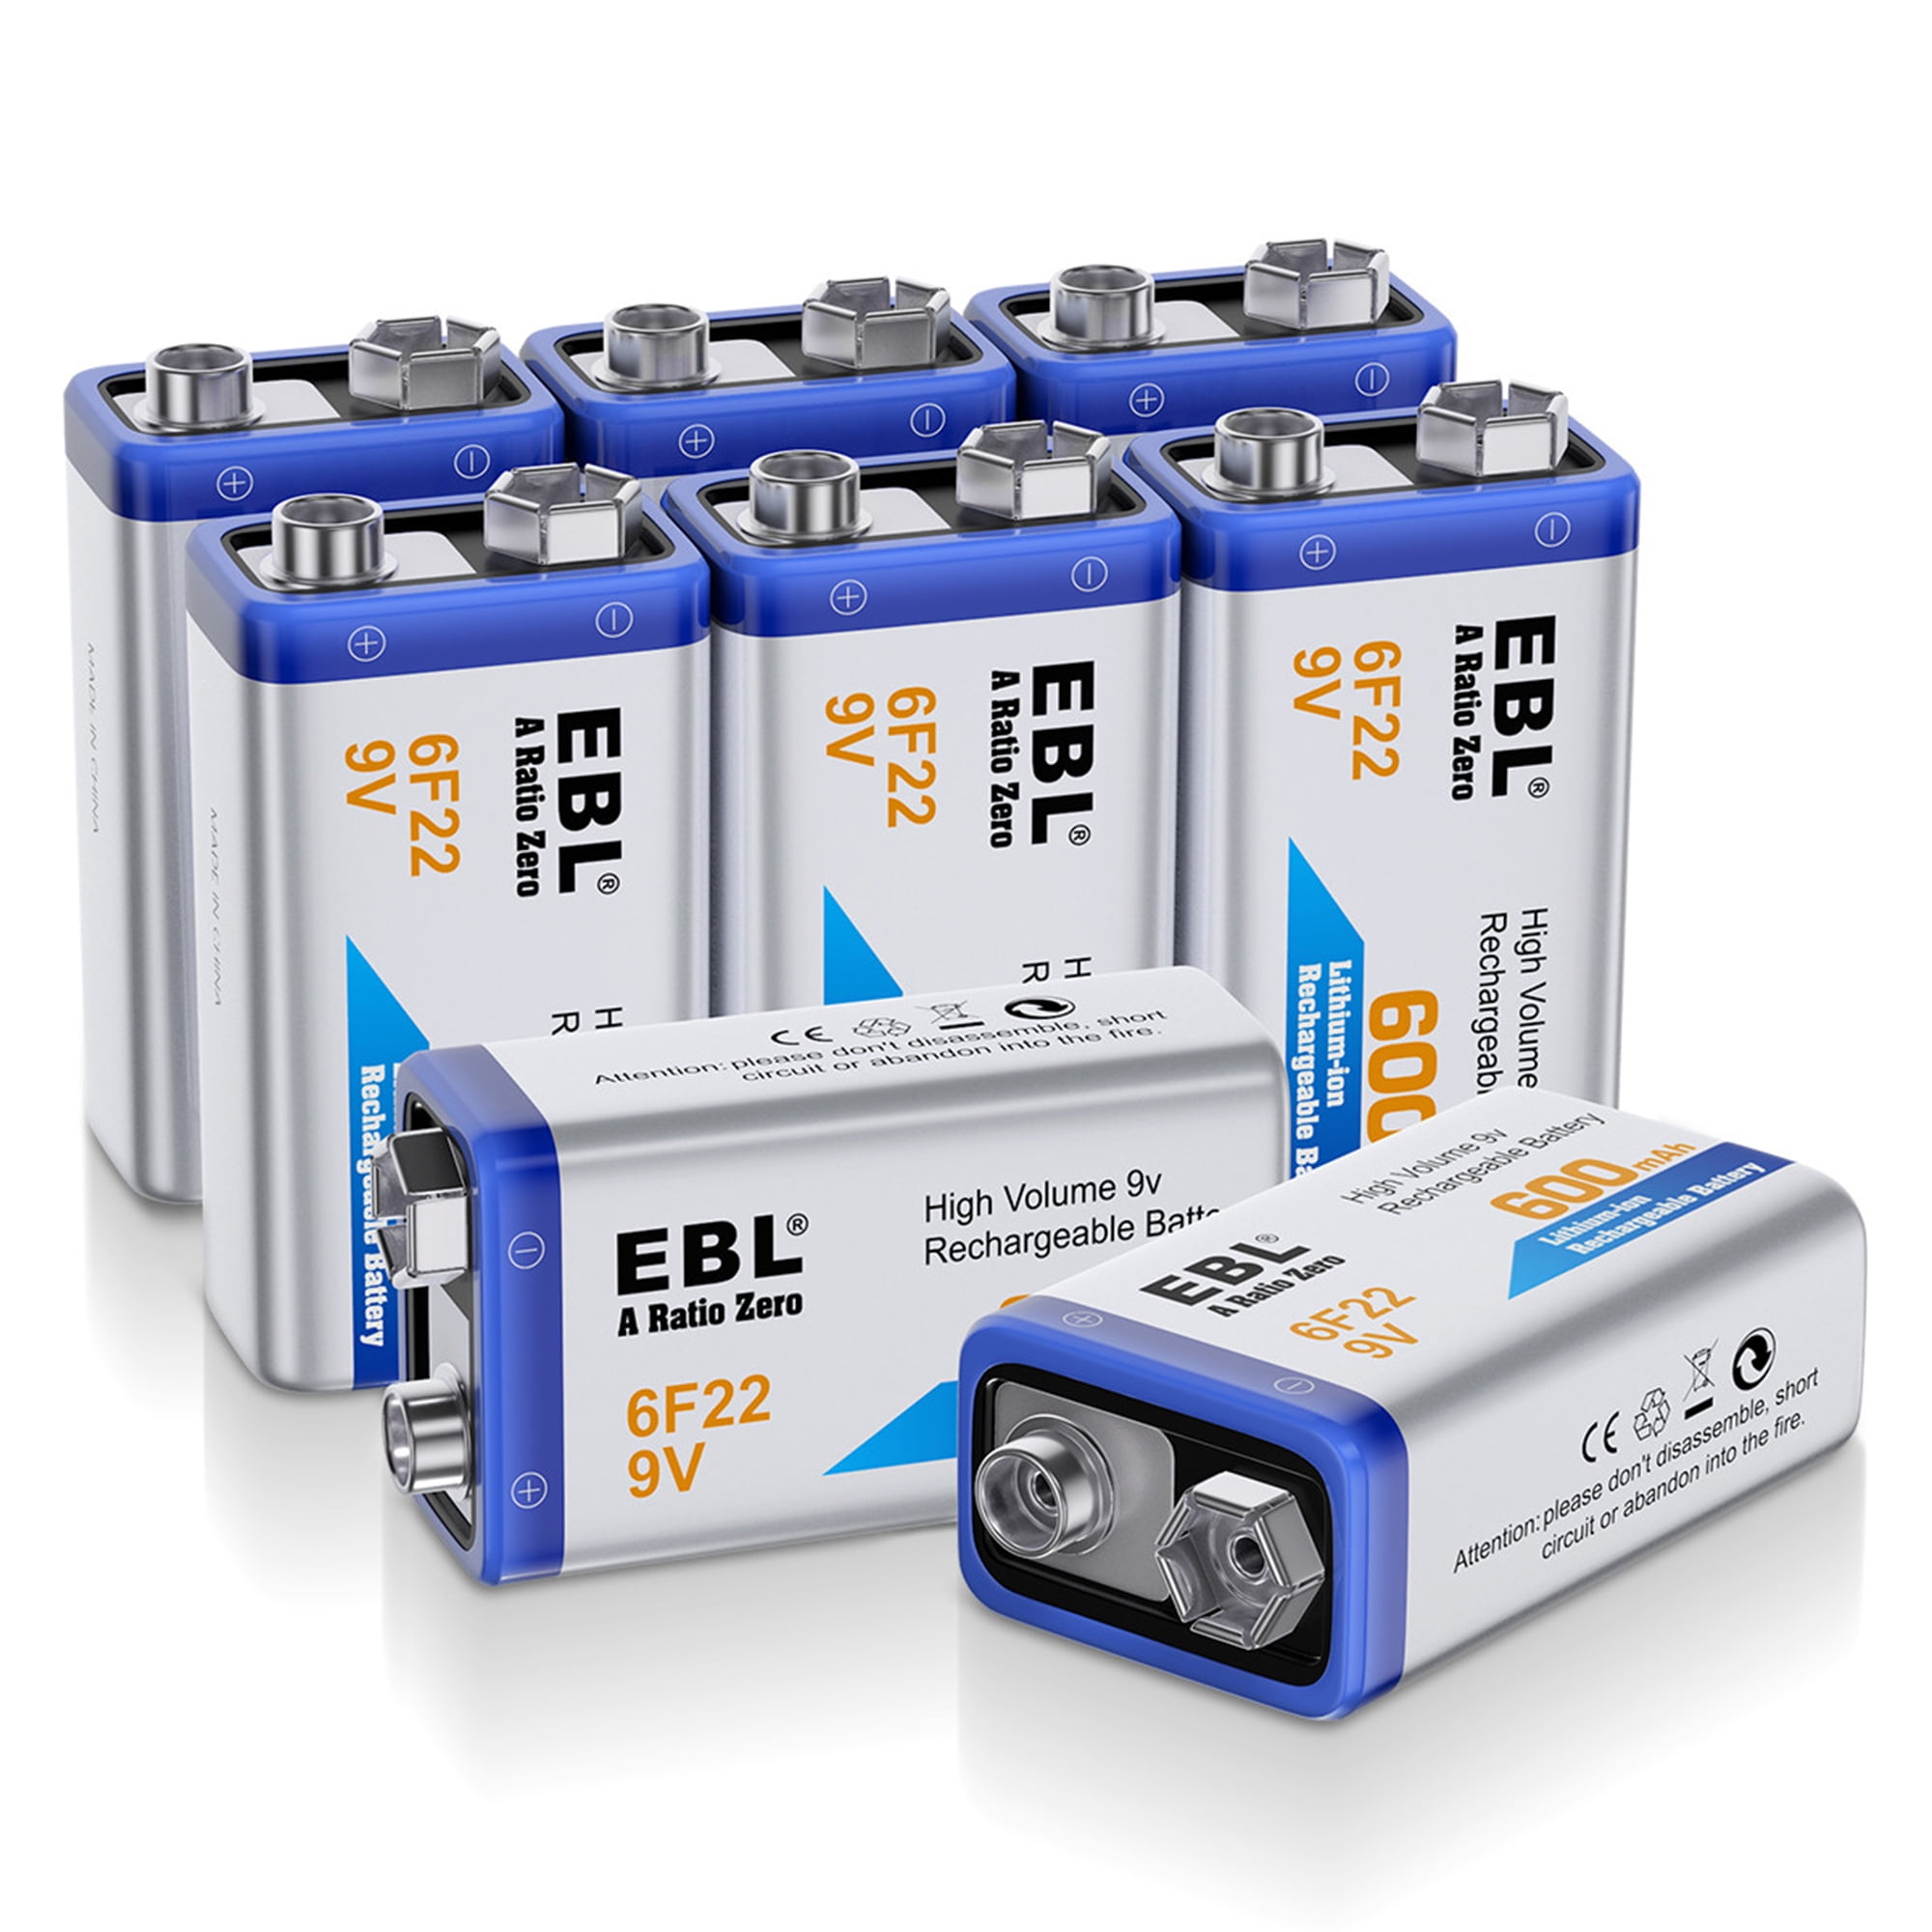 1 9V6F22 9V 6F22 Dry Battery 9 Volt Batteries From Weixcliao1, $17.43